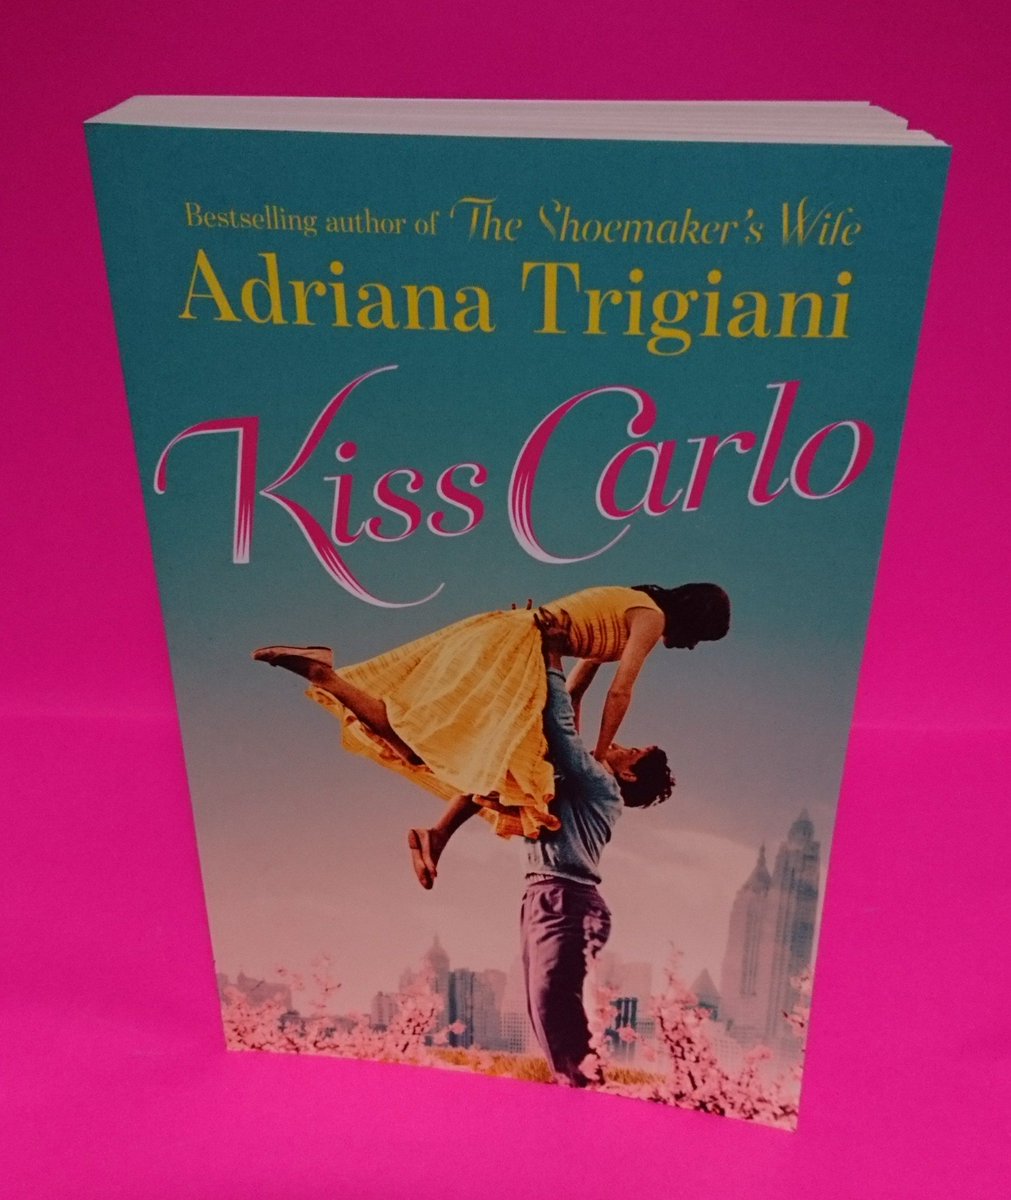 RT&Follow by 5pm 7th August to get your name in the Hat for the chance to #WIN a copy of the gorgeous #KissCarlo by @adrianatrigiani.